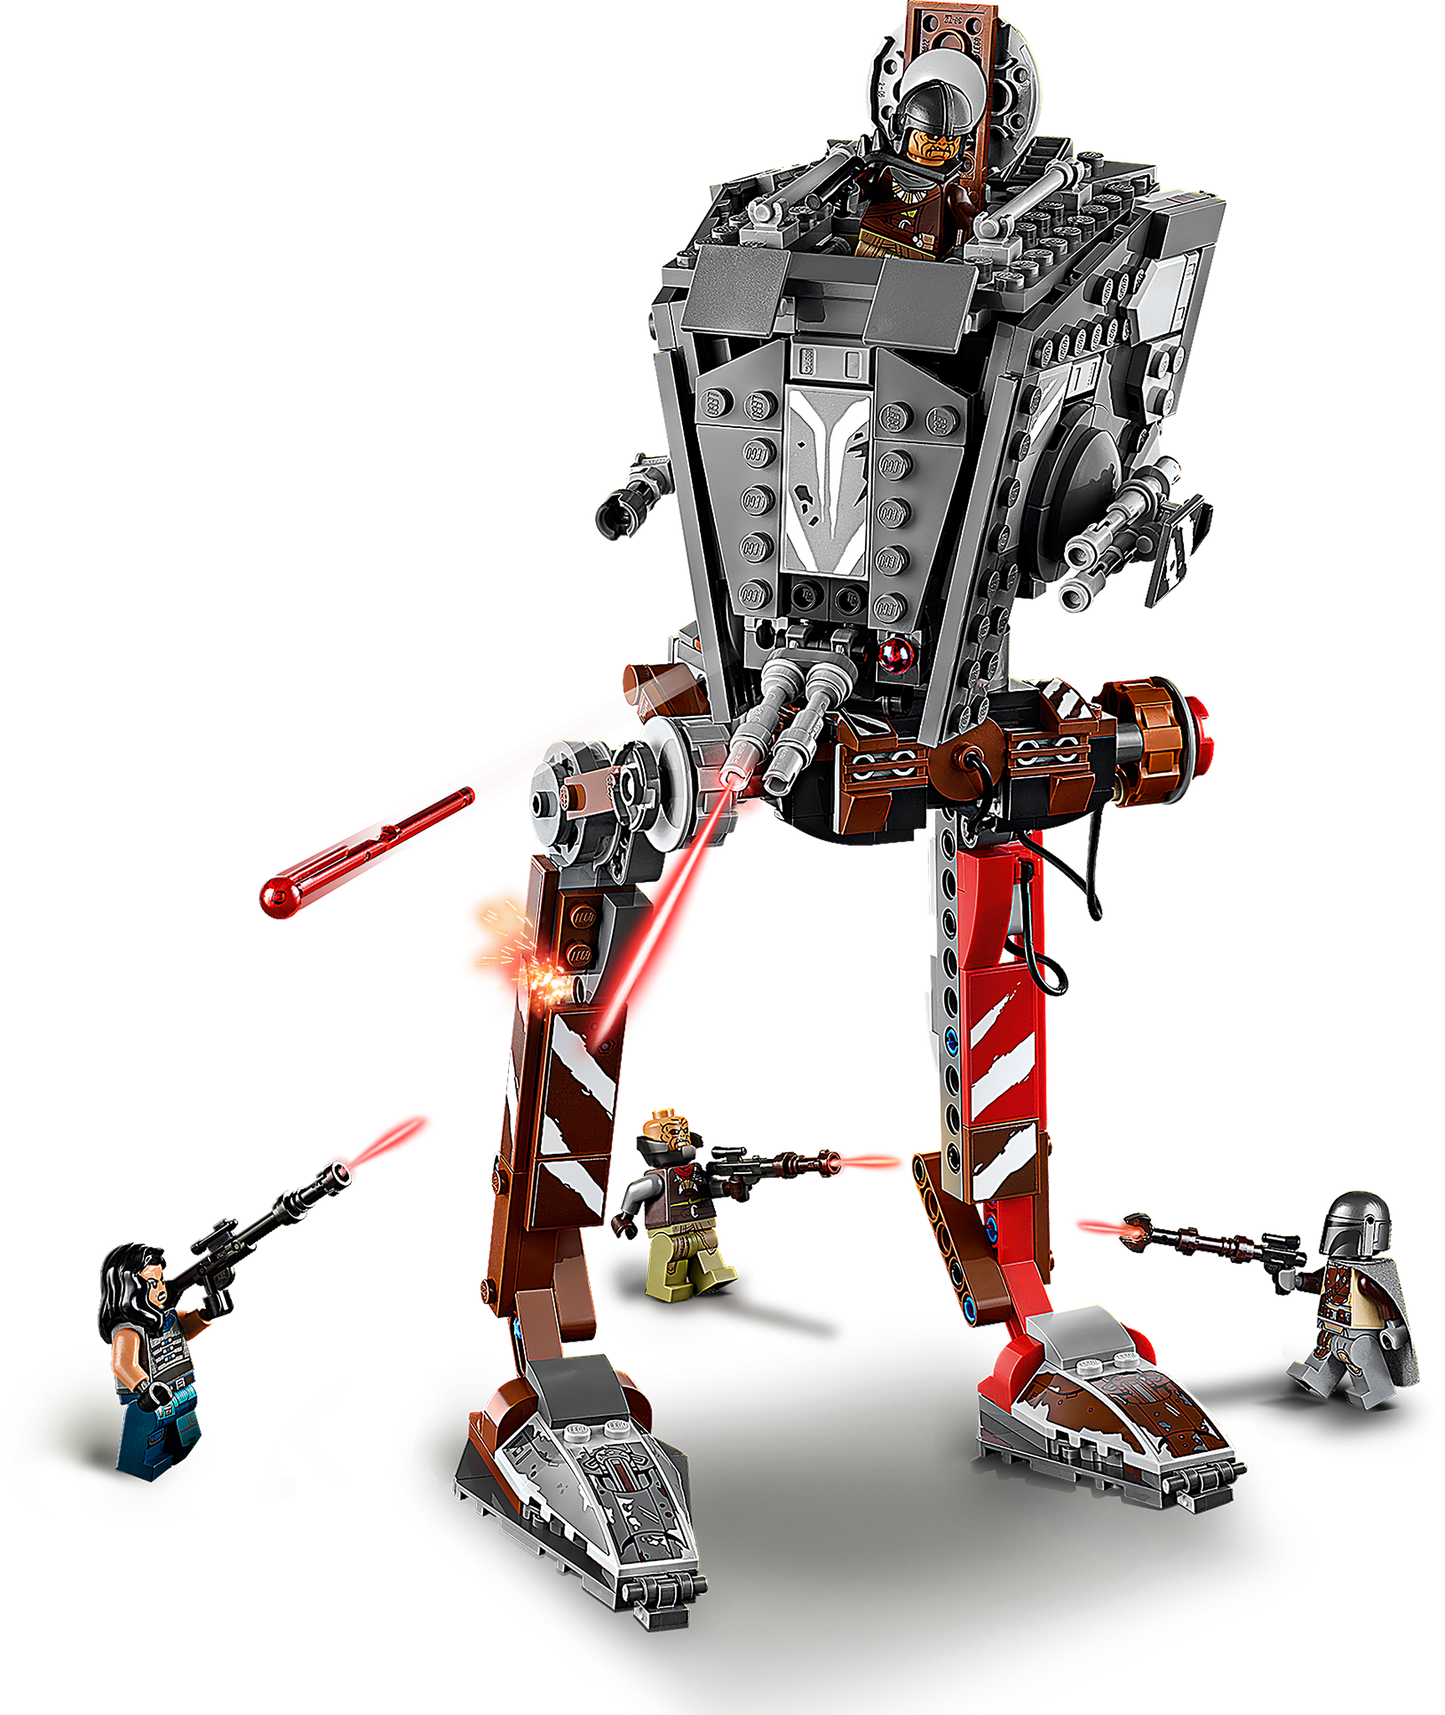 LEGO Star Wars at-ST Raider 75254 Building Kit (540 Pieces) Top Selling Building & Construction Toy Figures